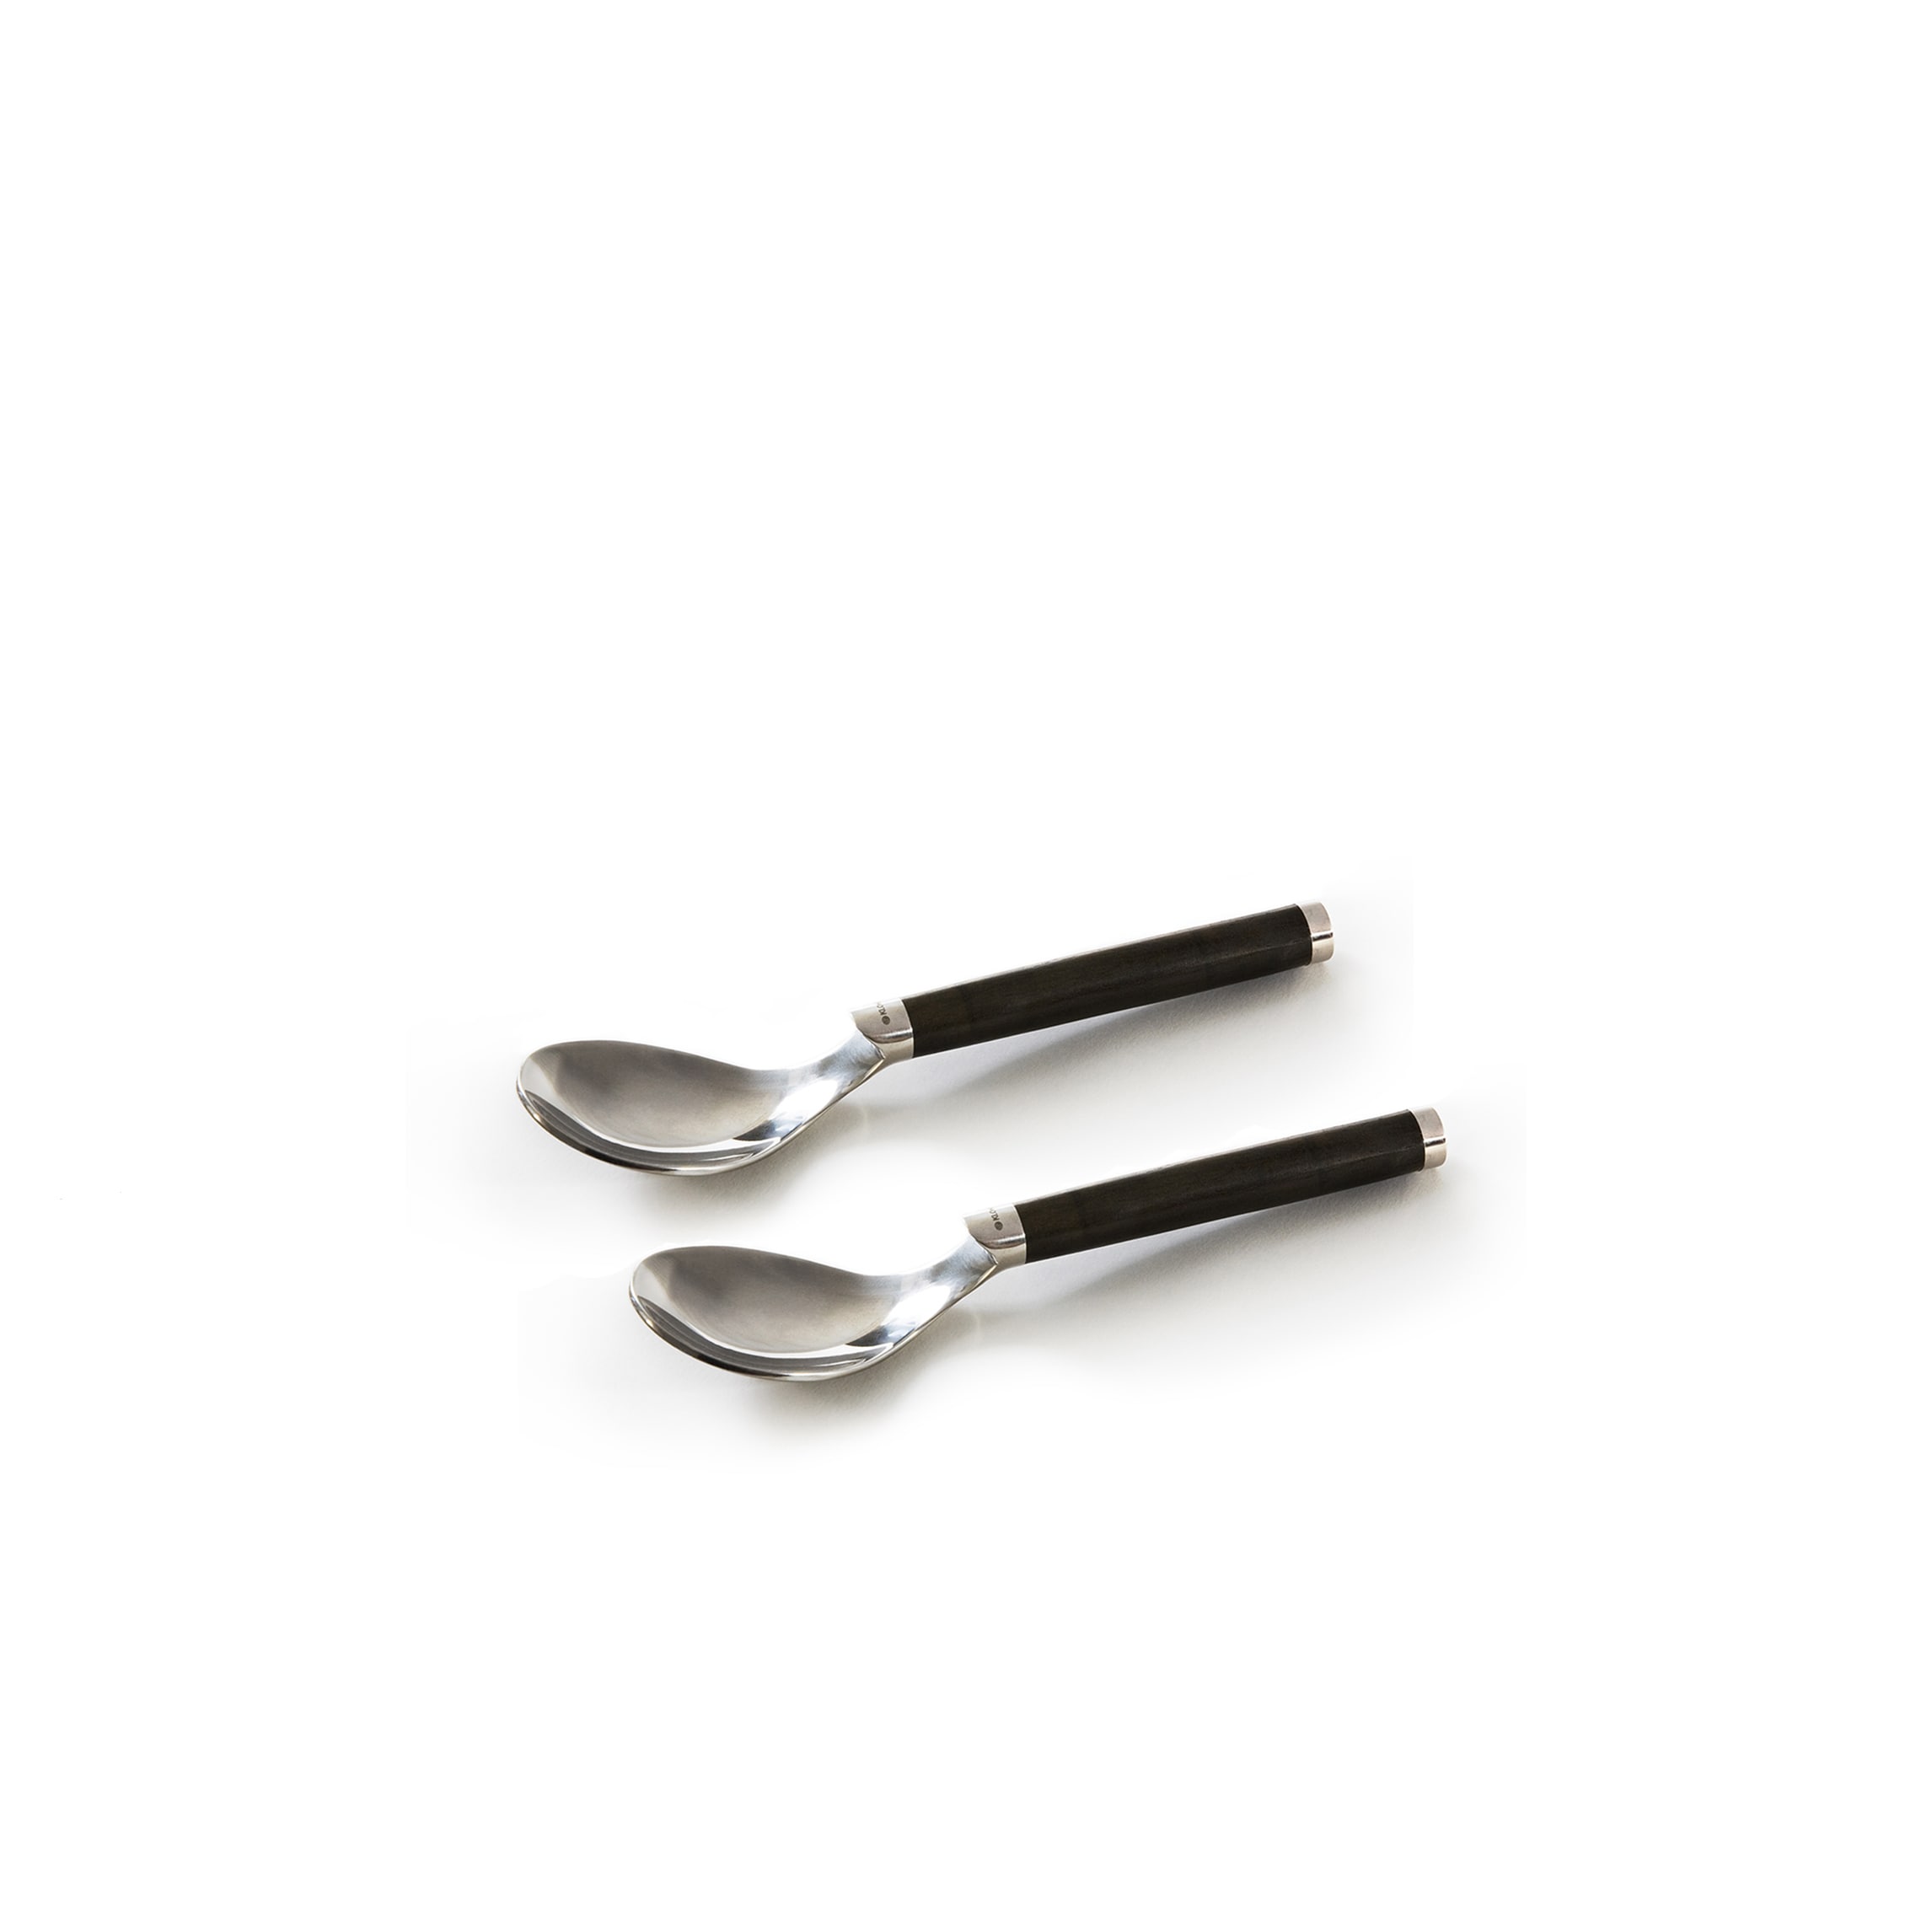 Salvia Small Spoon 2-pack